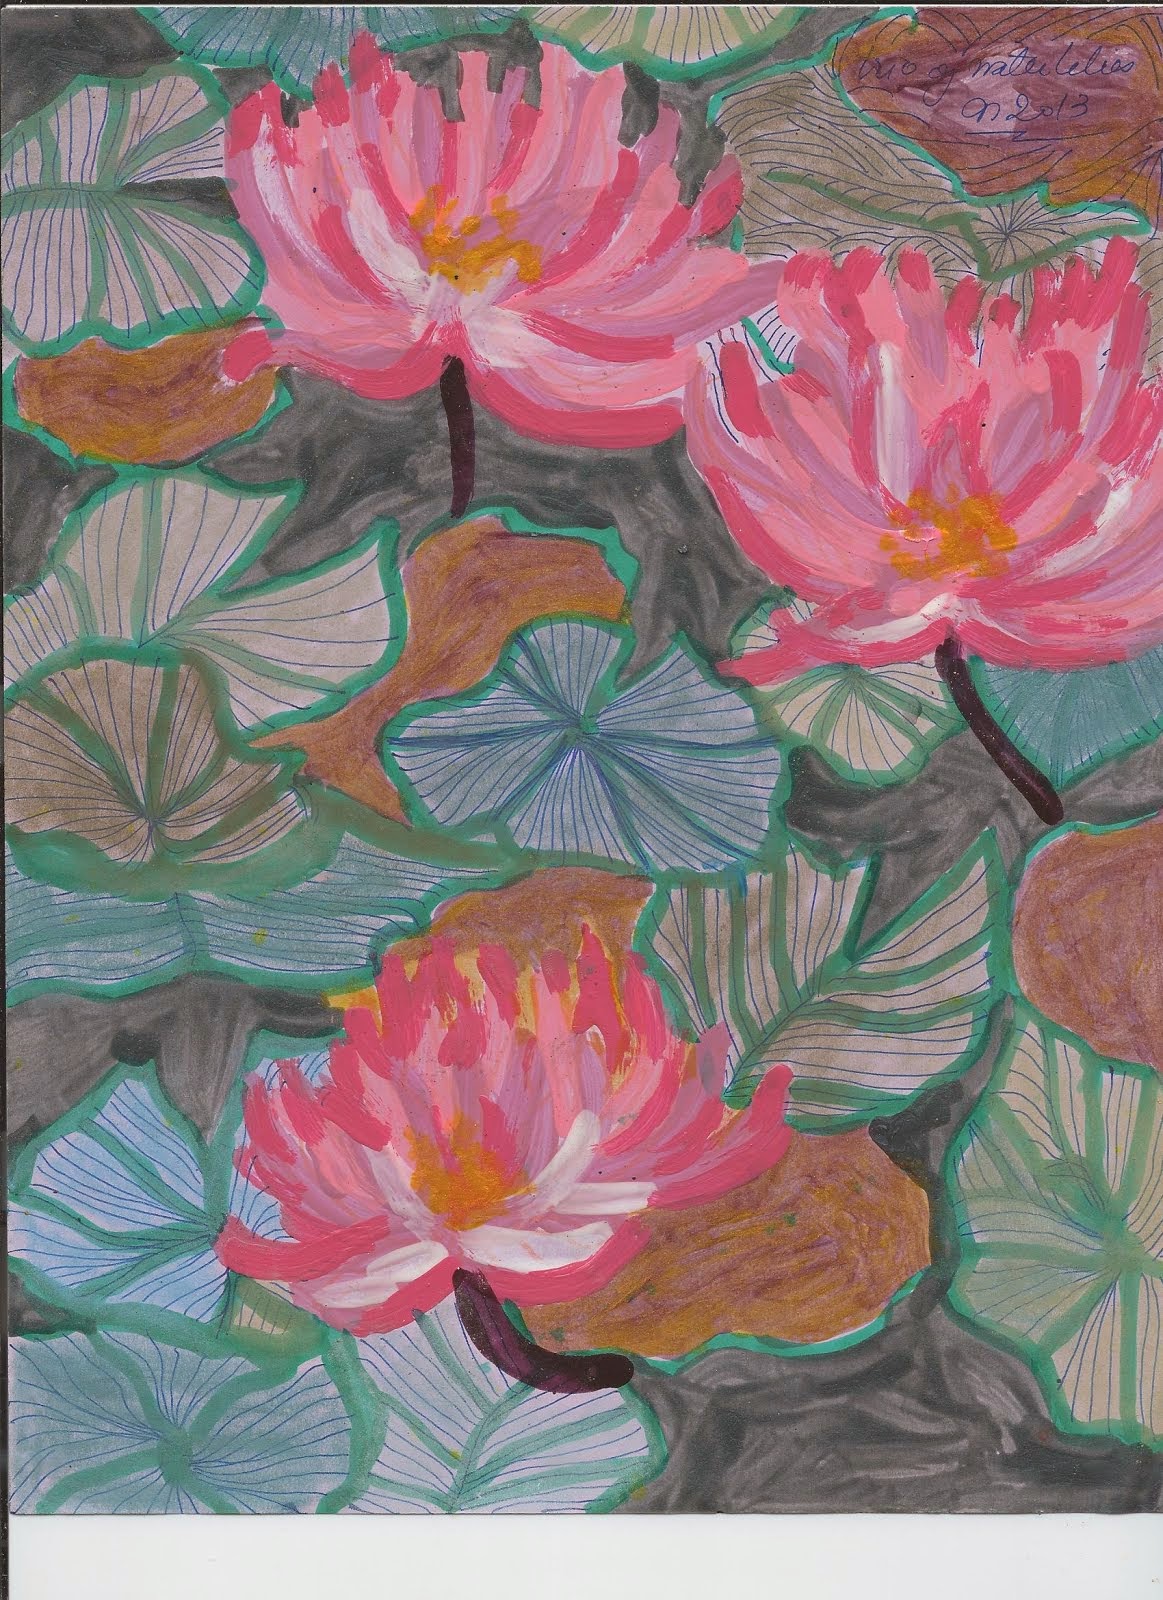 TRIO OF WATER LILIES